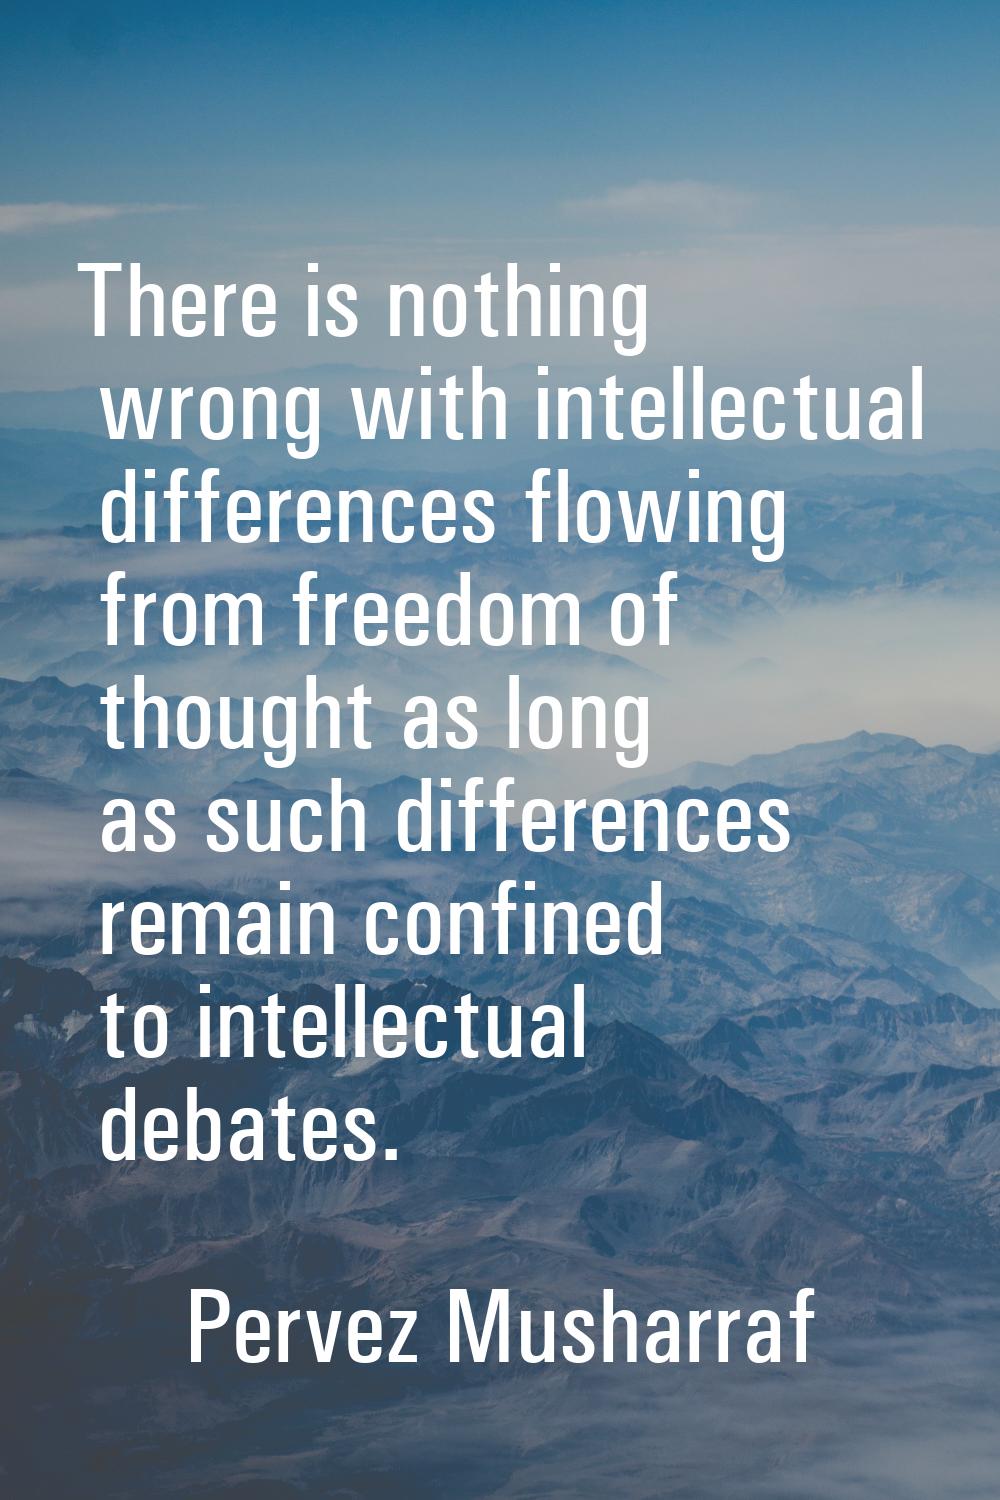 There is nothing wrong with intellectual differences flowing from freedom of thought as long as suc